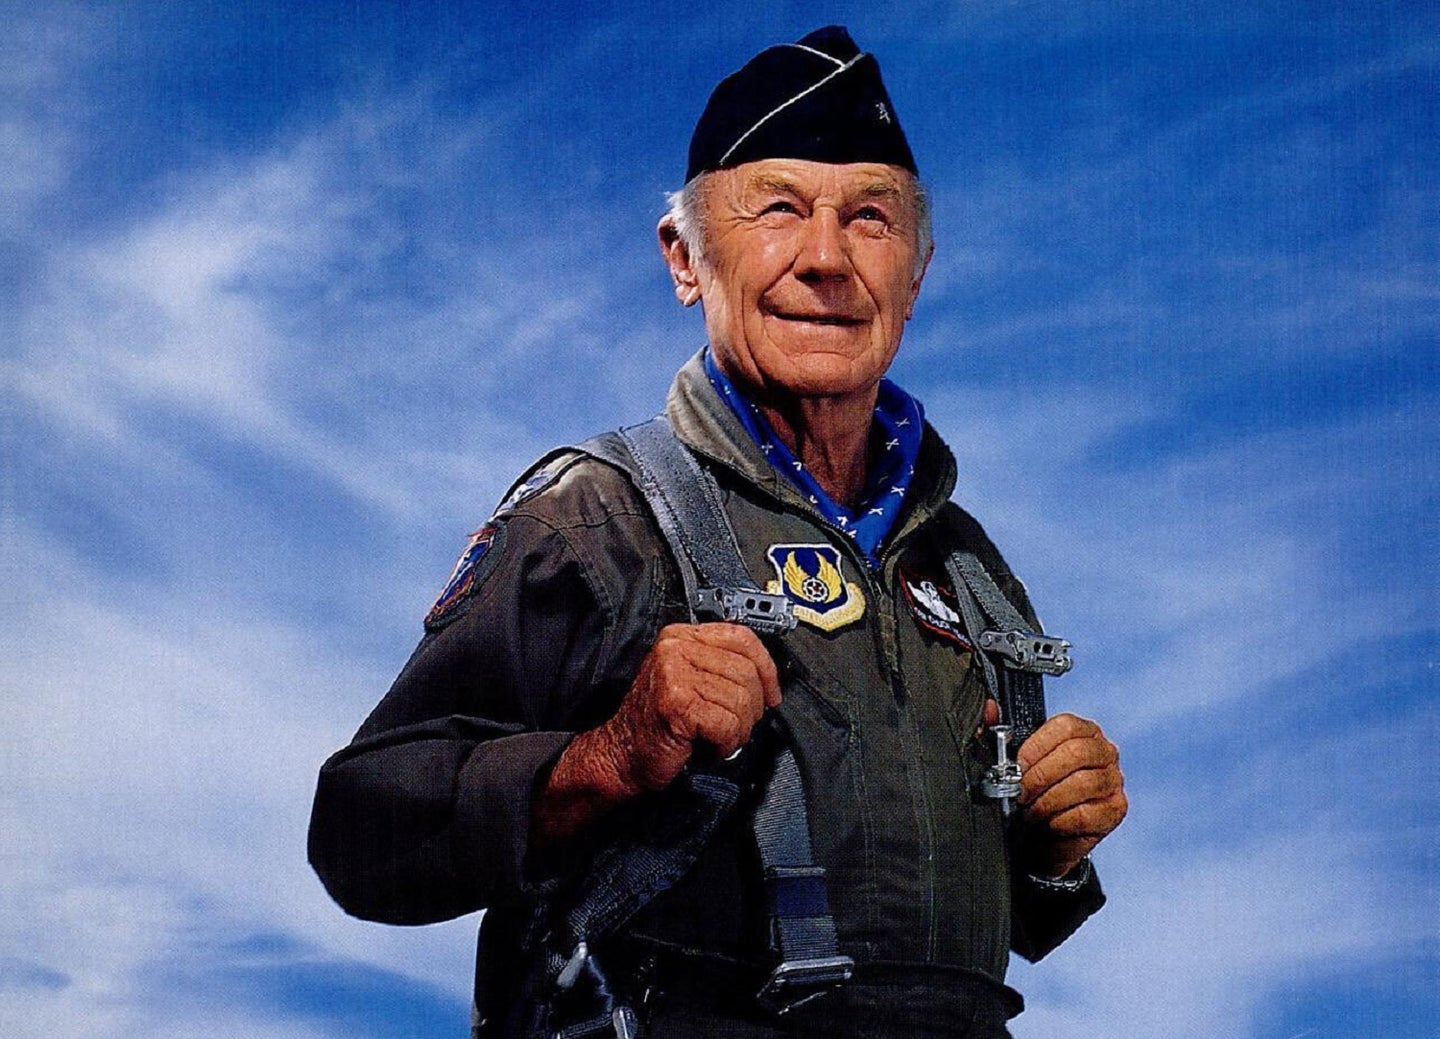 Chuck Yeager at a flying event in 1998